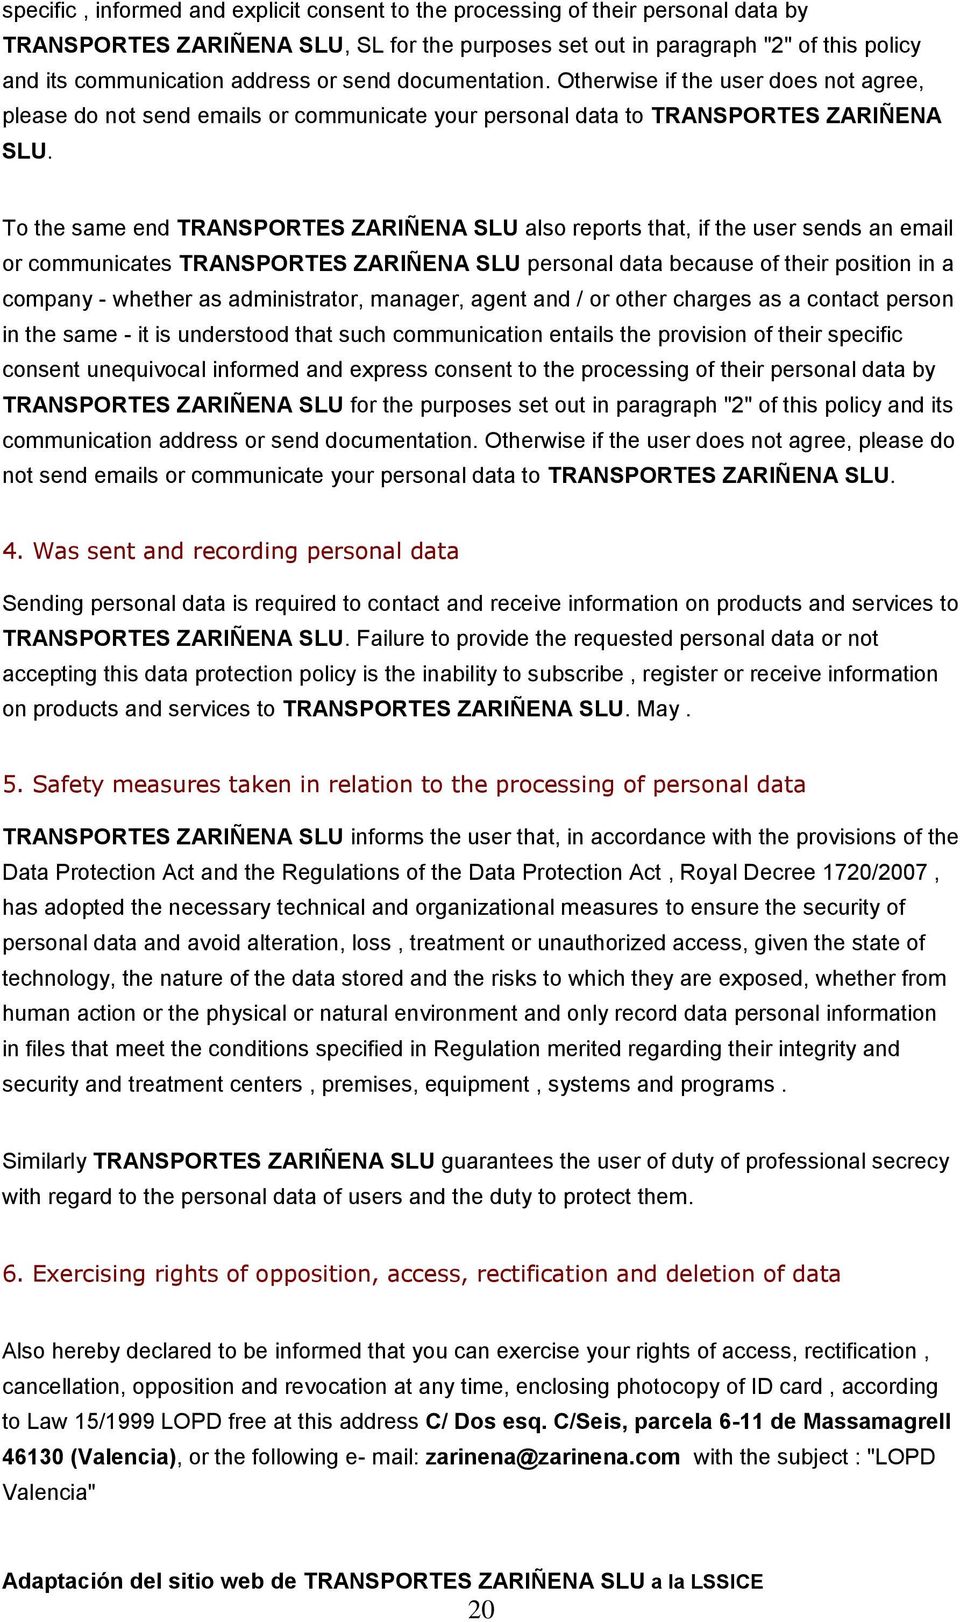 To the same end TRANSPORTES ZARIÑENA SLU also reports that, if the user sends an email or communicates TRANSPORTES ZARIÑENA SLU personal data because of their position in a company - whether as